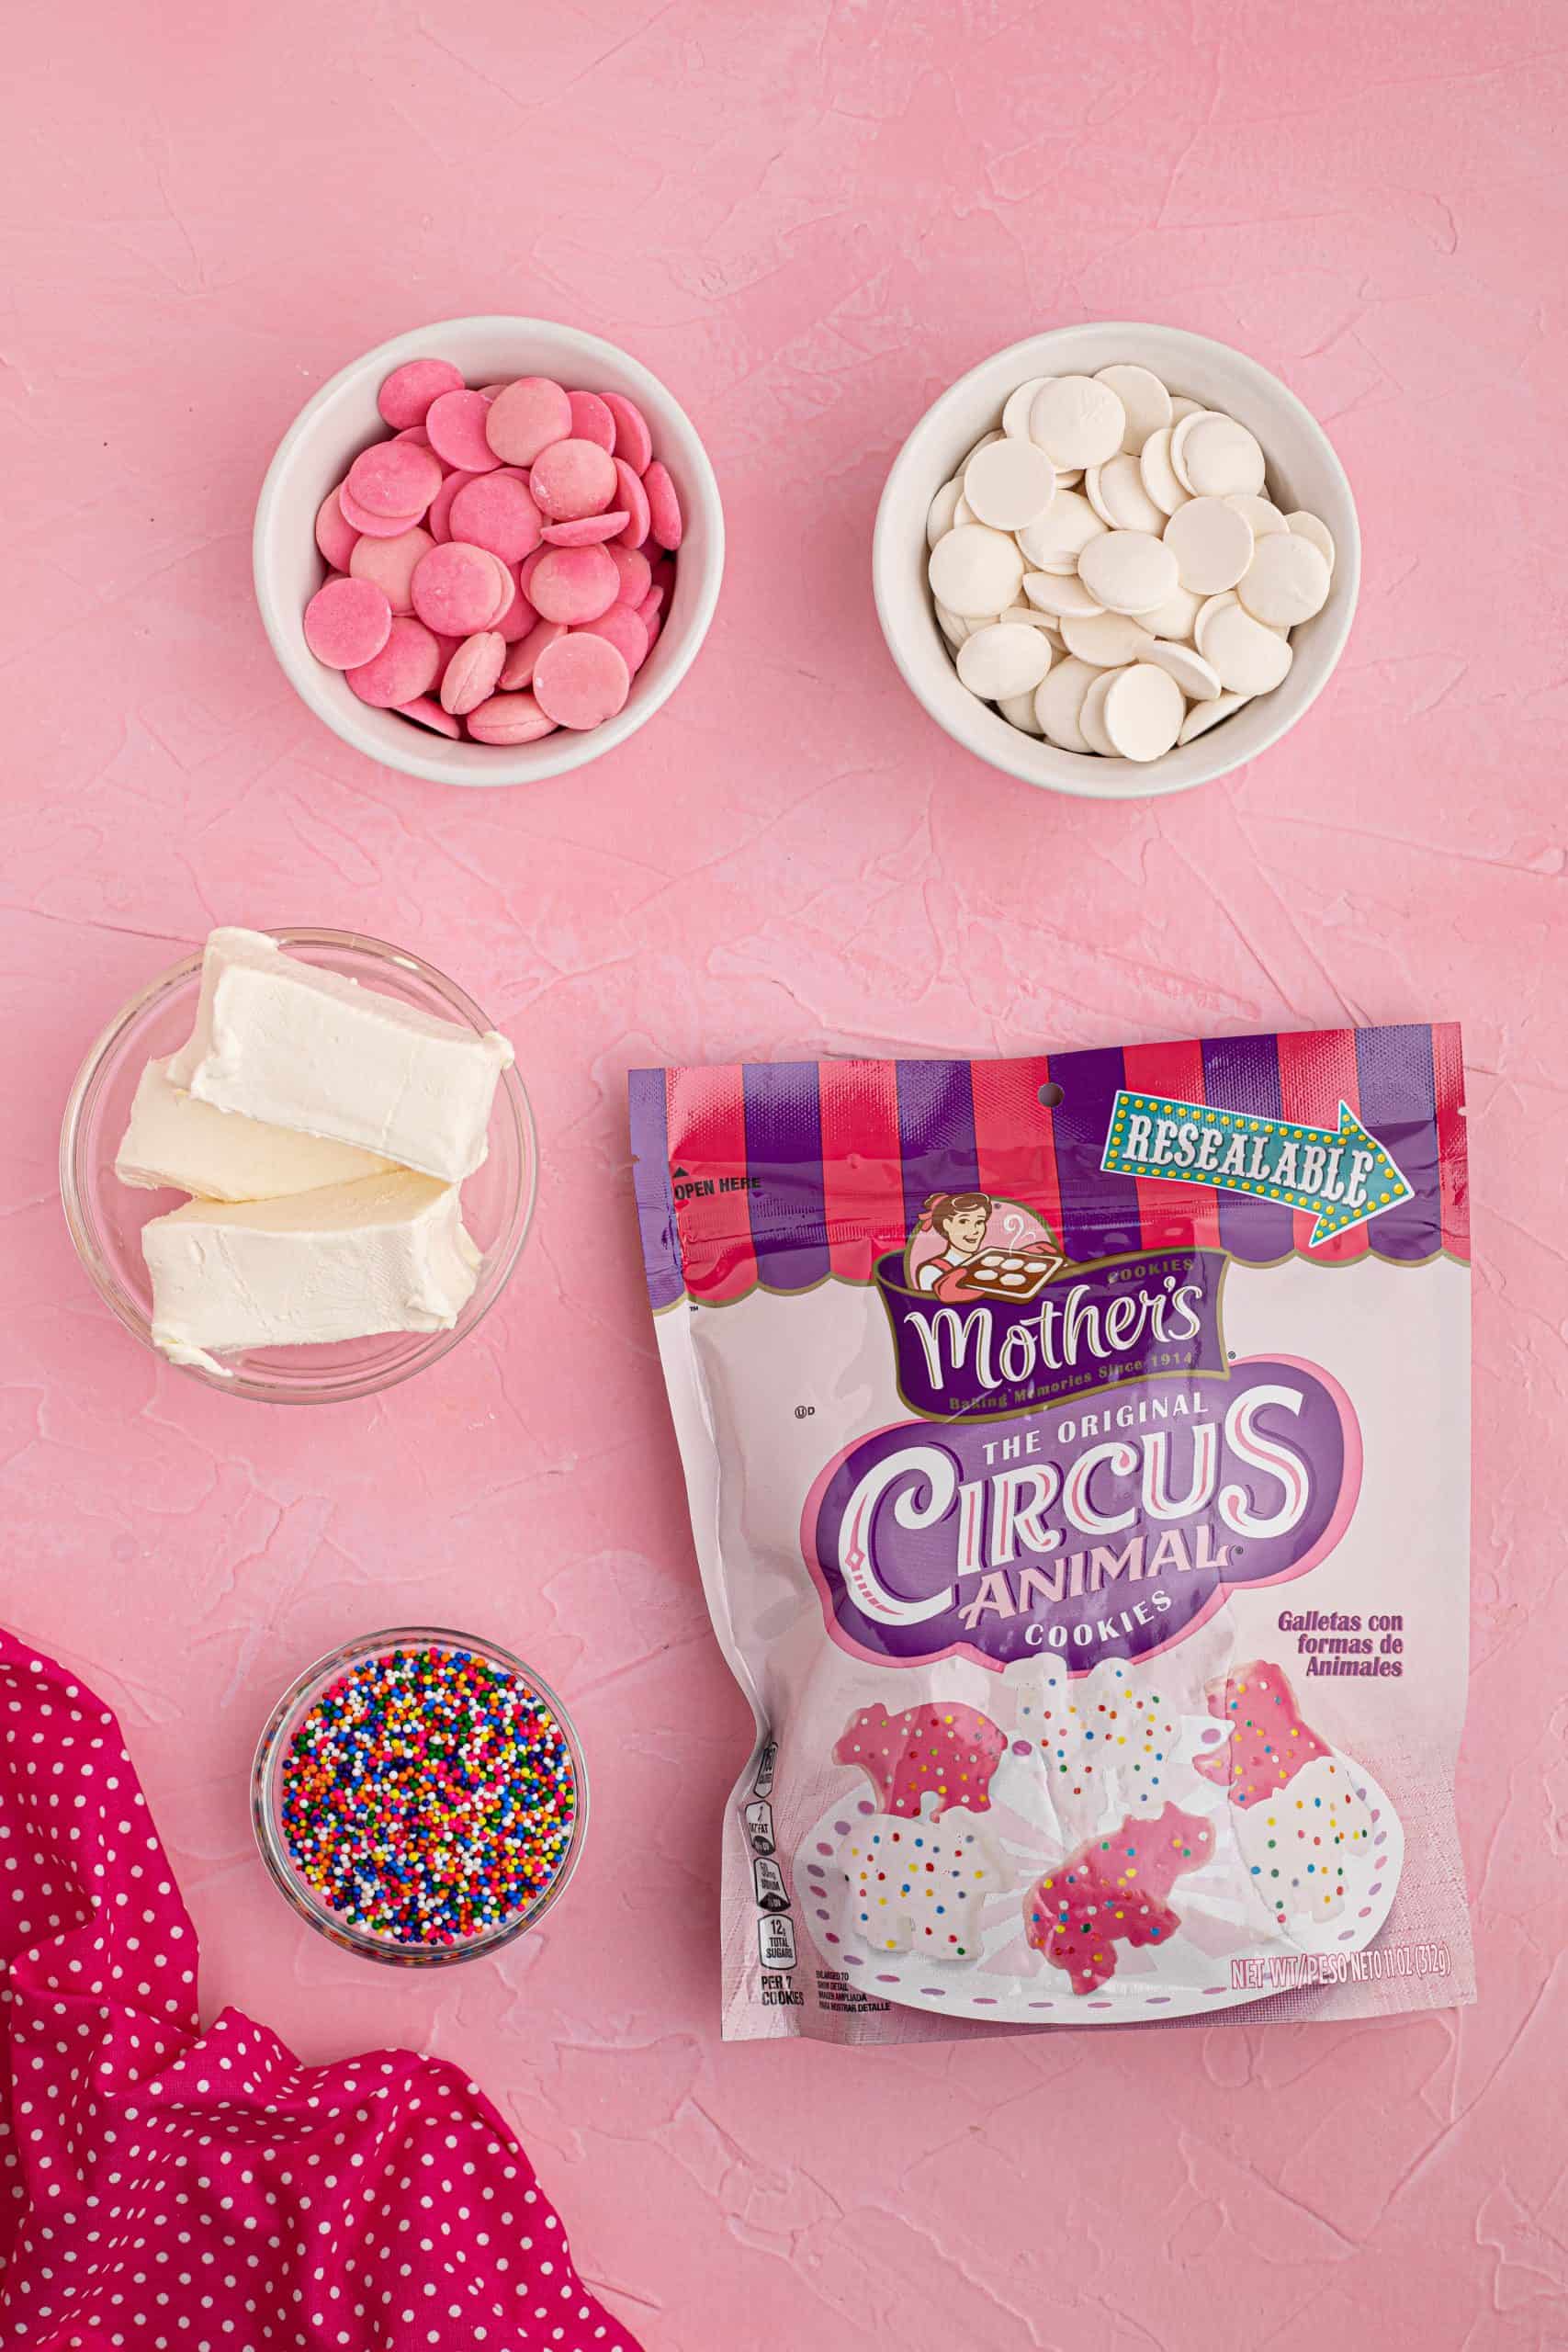 Ingredients needed to make Circus Animal Cookie Balls: CIRCUS ANIMAL COOKIES, PINK CANDY MELTS, WHITE CANDY MELTS, CREAM CHEESE.